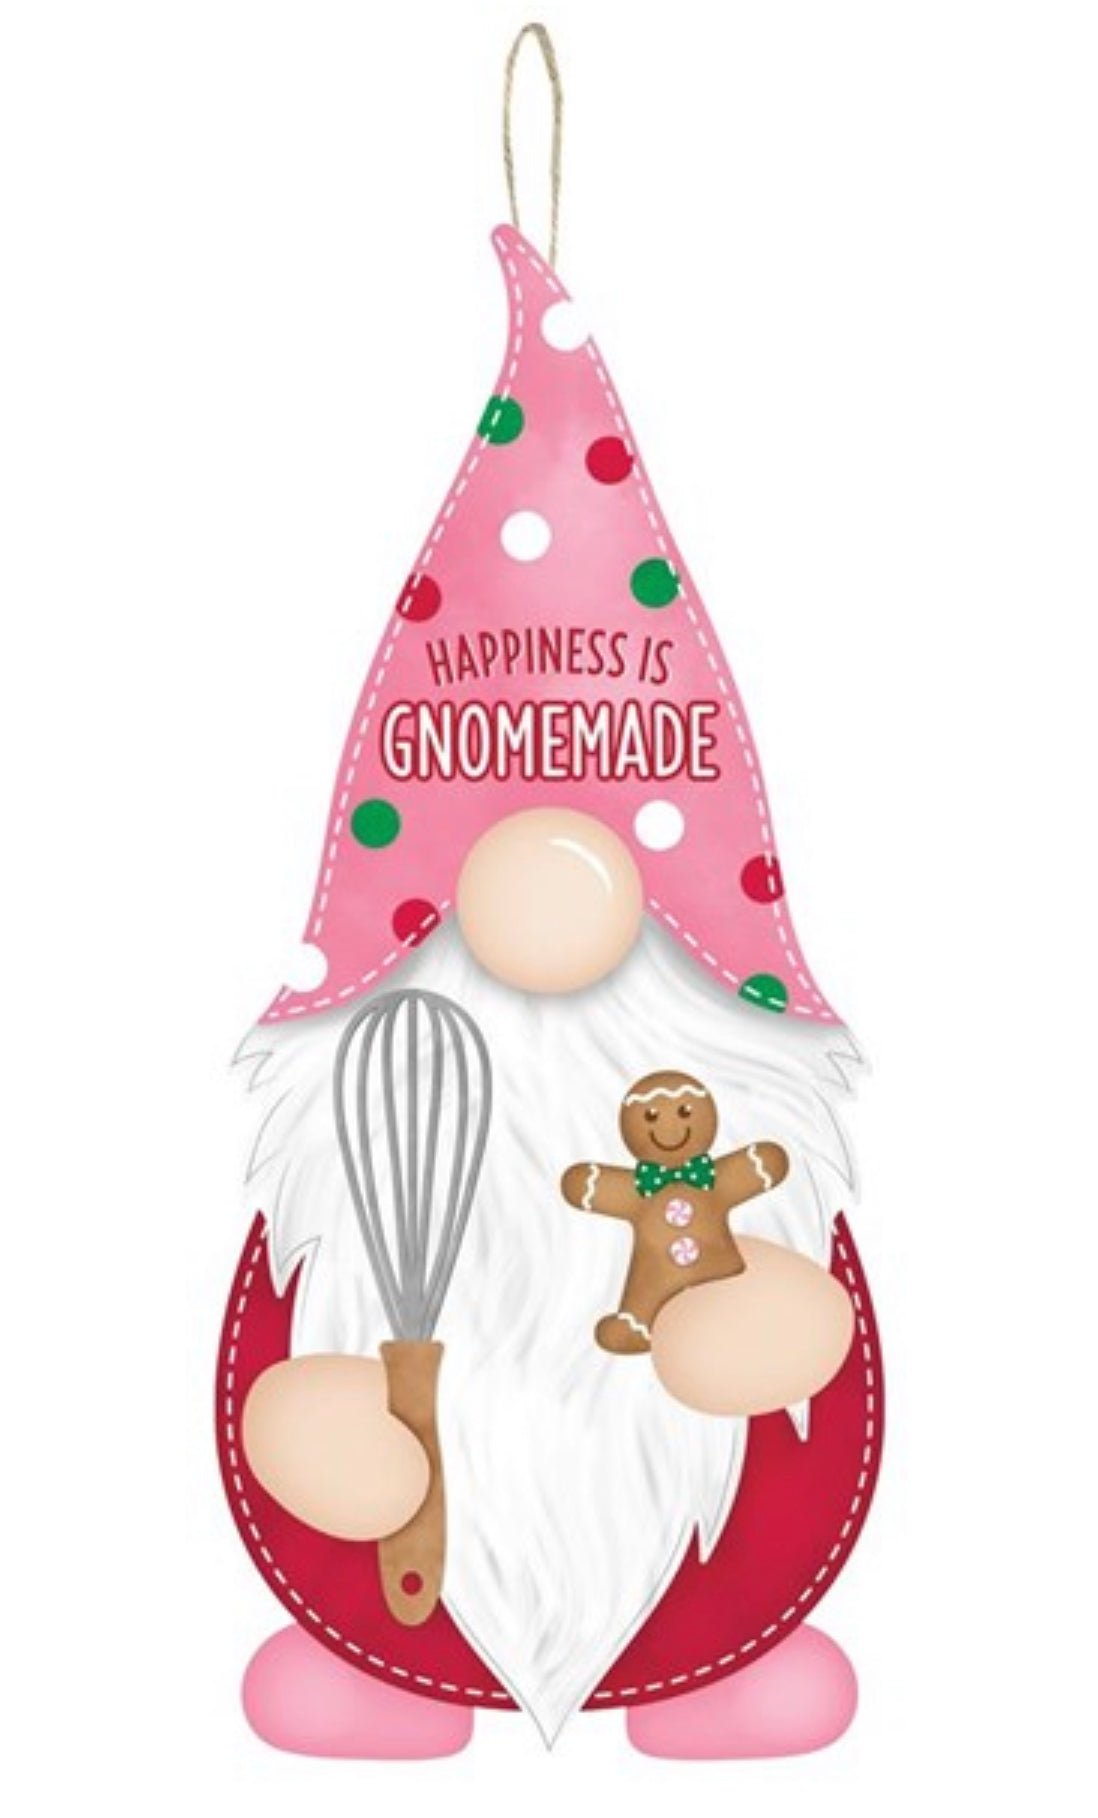 Happiness is Gnomemade Christmas sign - Greenery MarketWinter and Christmasap7129